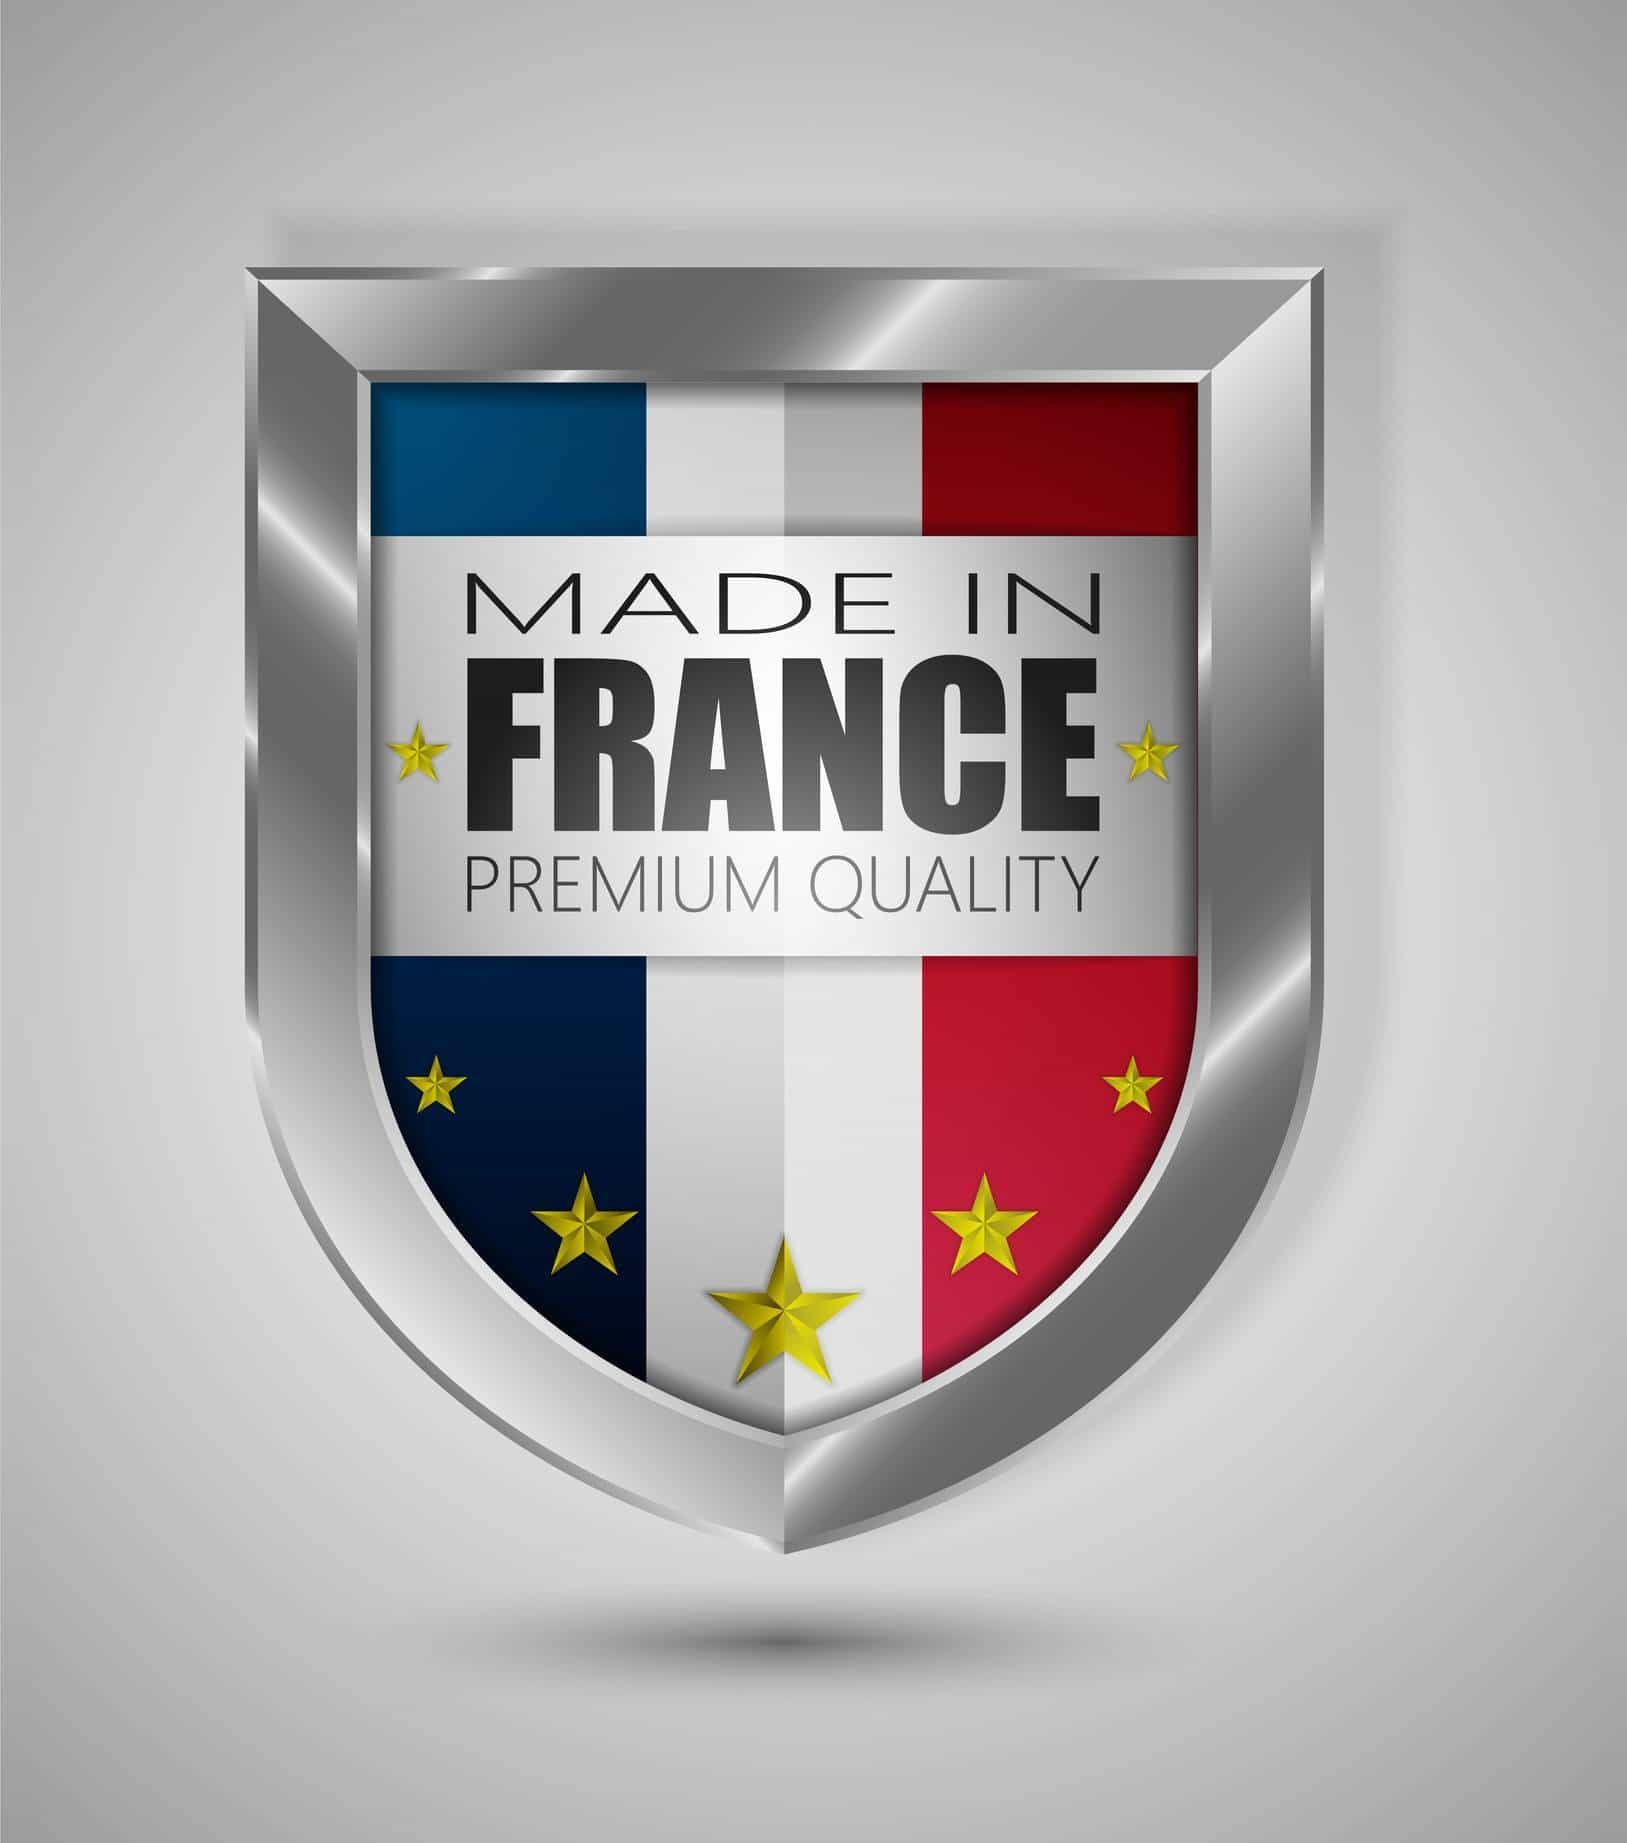 Made in France, a guarantee of quality